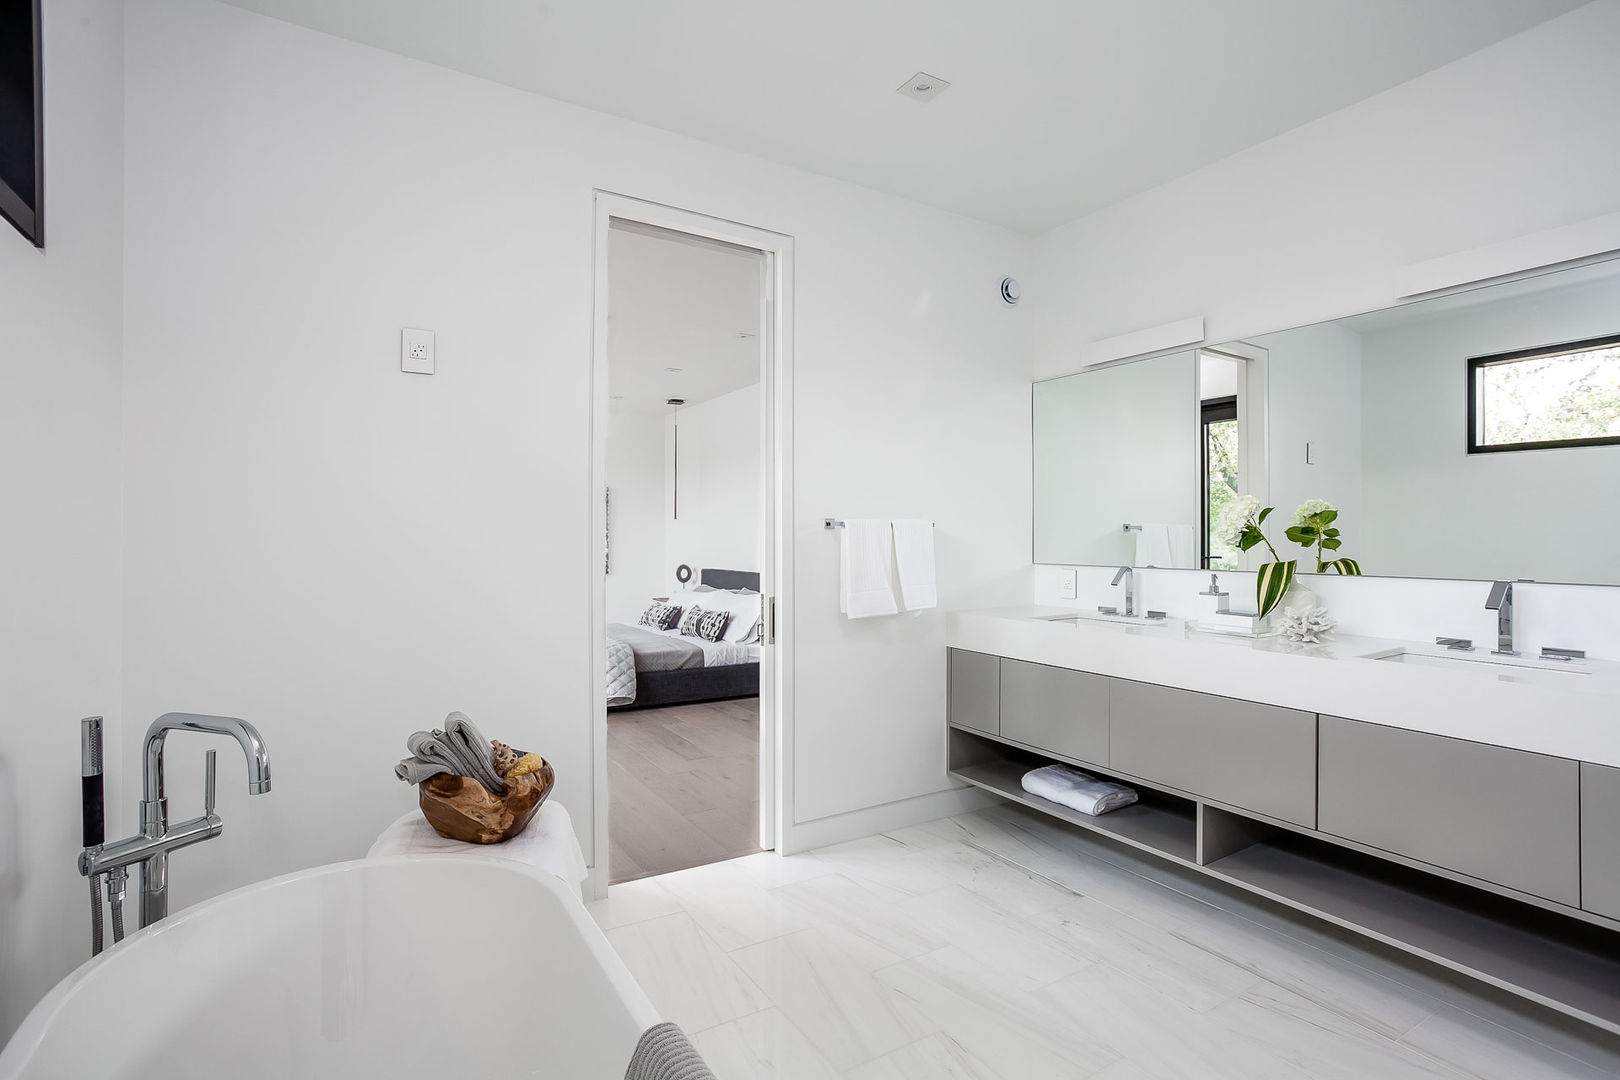 New Build-Staging, Frahm Interiors Frahm Interiors Bagno moderno